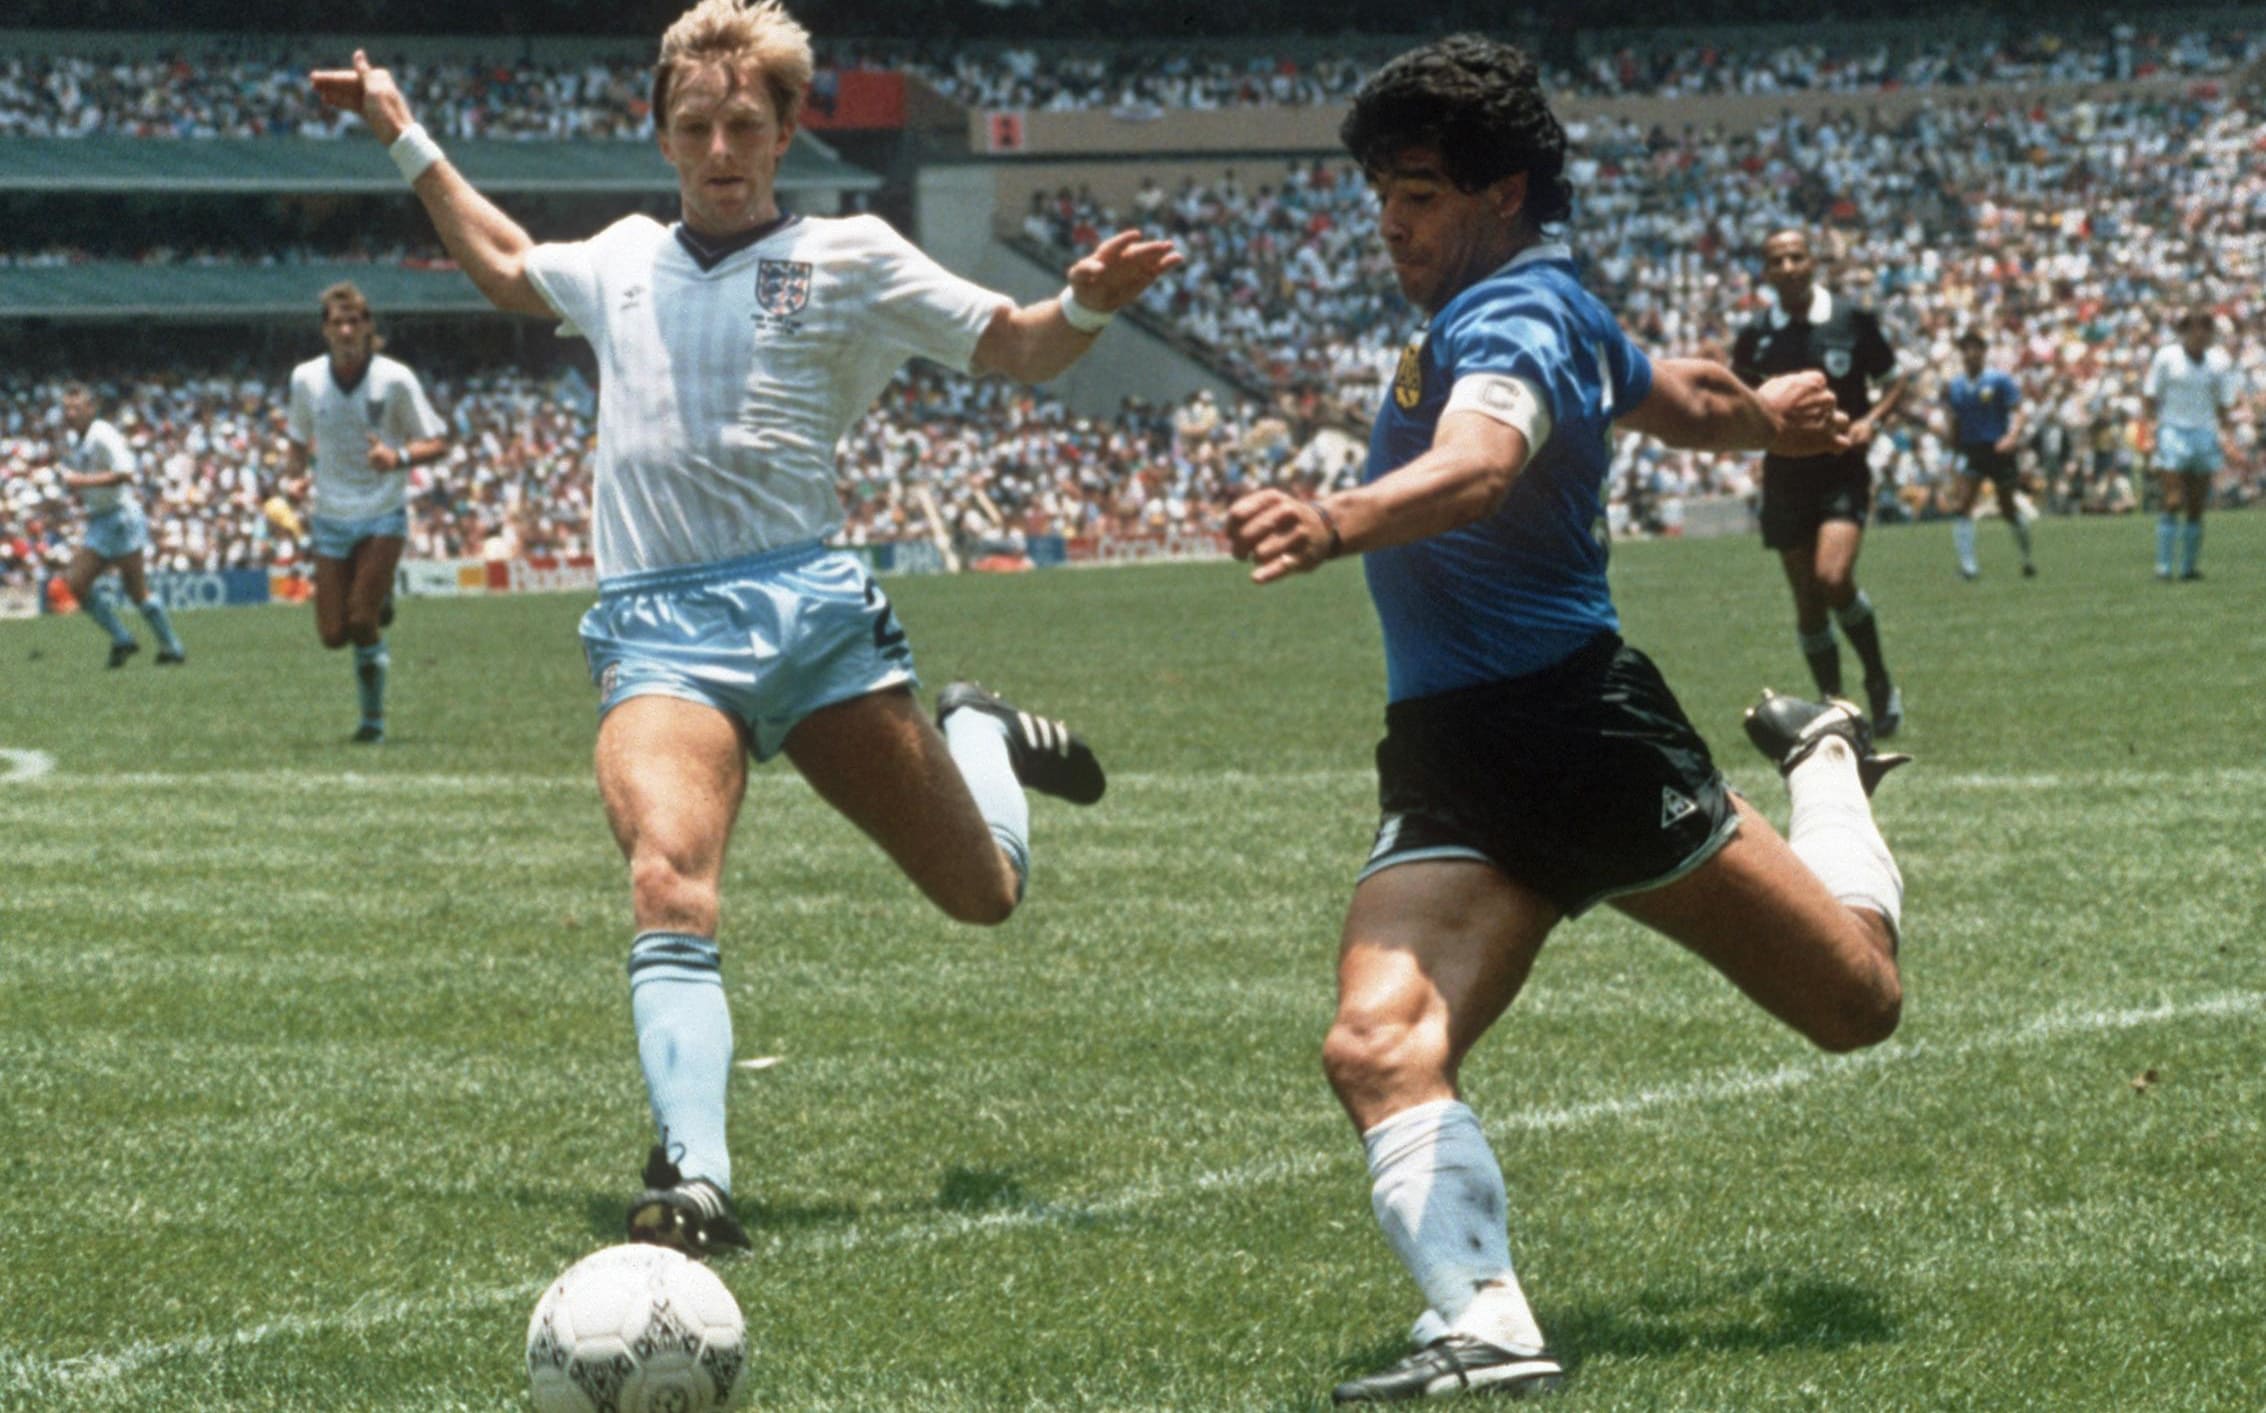 Argentinian forward Diego Maradona gets ready to cross the ball under pressure from English defender Gary Stevens during the World Cup quarterfinal soccer match between Argentina and England on June 1986.